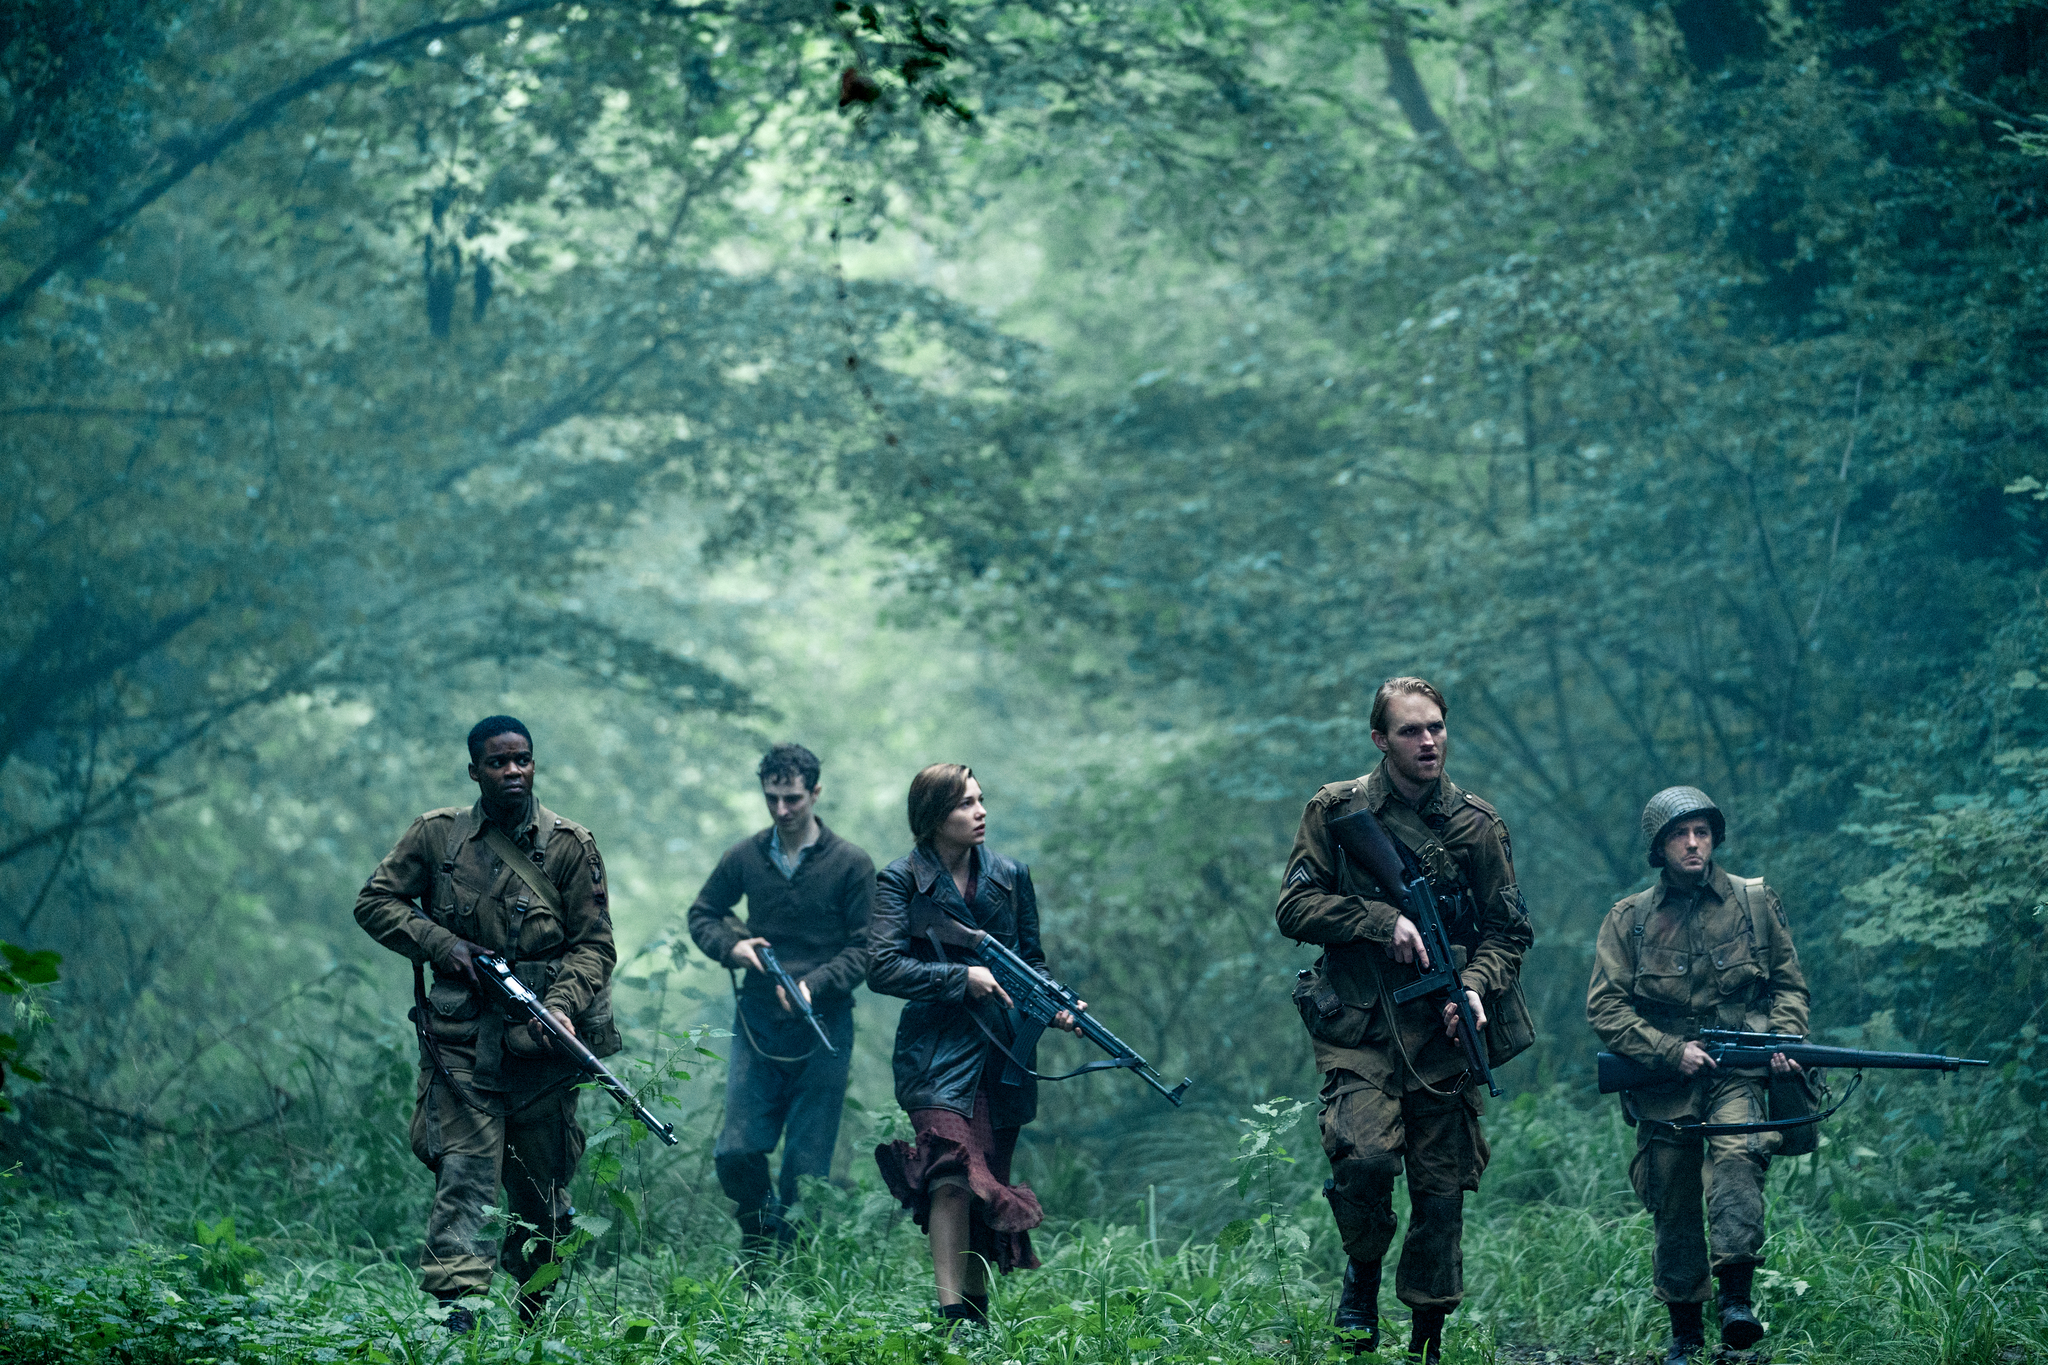 (L-R) Jovan Adepo as Boyce, Dominic Applewhite as Rosenfeld, Mathilde Ollivier as Chloe, Wyatt Russell as Ford, and John Magaro as Tibbet. OVERLORD. Paramount Pictures. 2018.